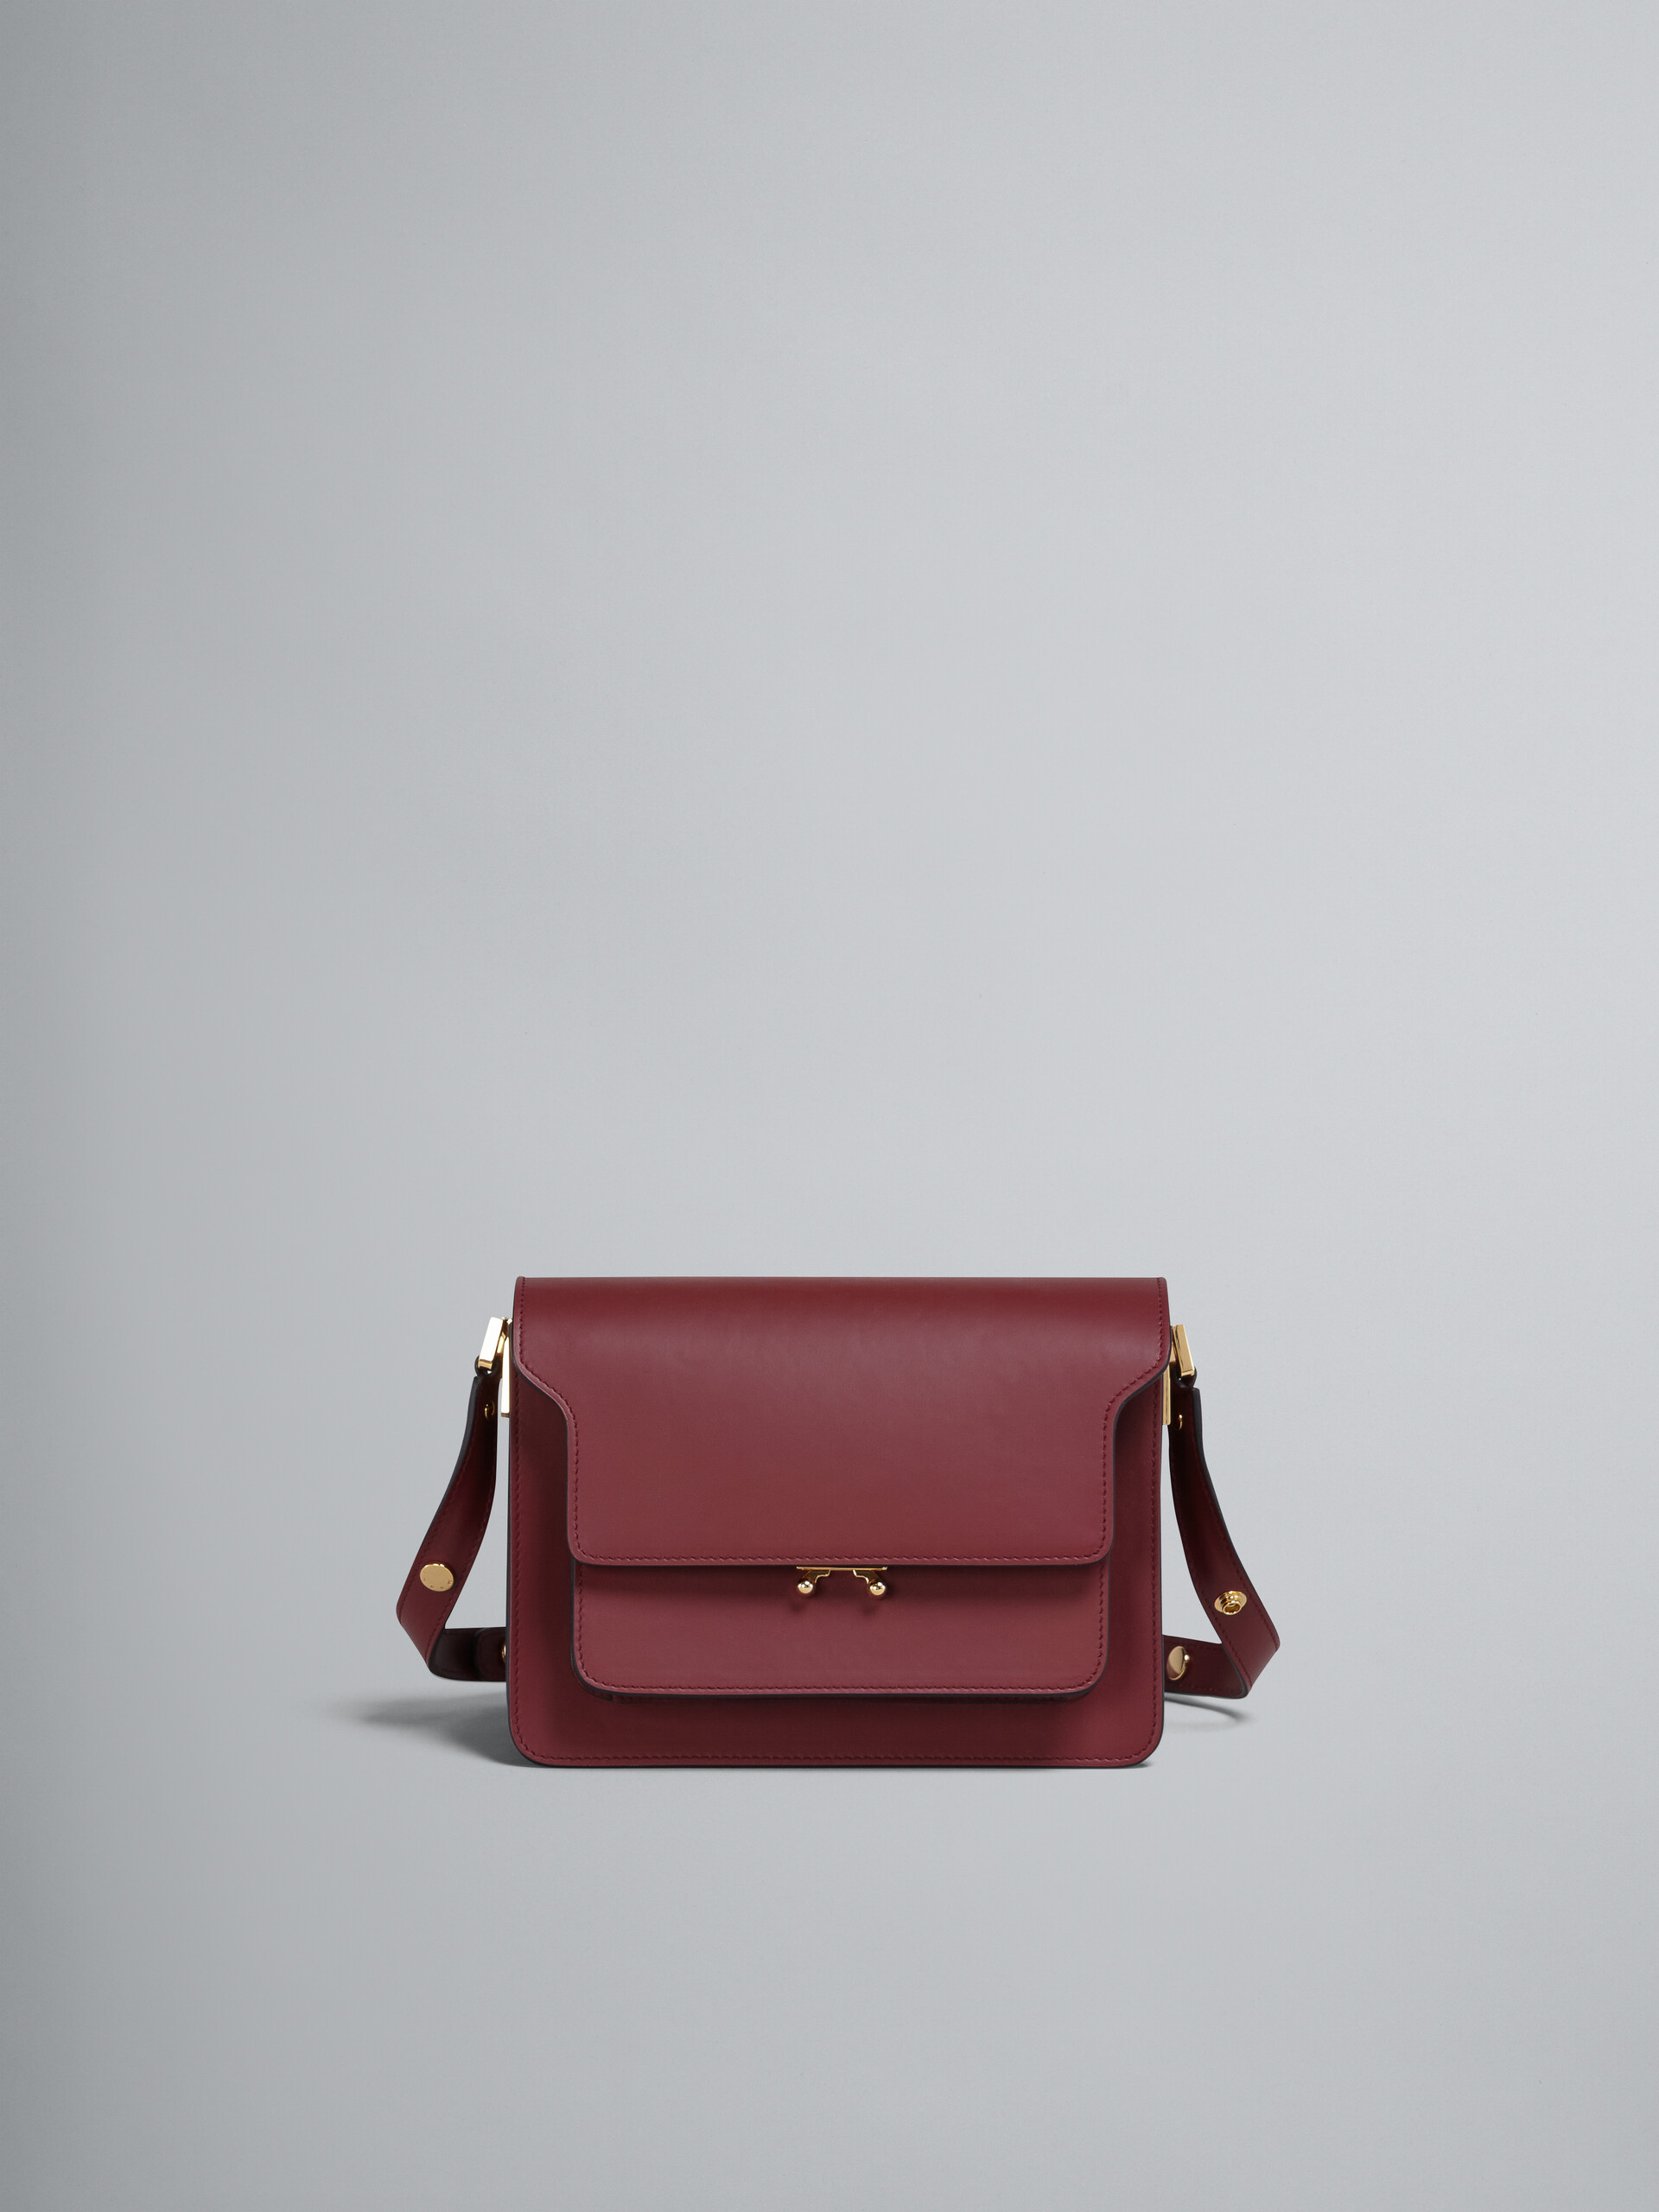 TRUNK medium bag in red leather